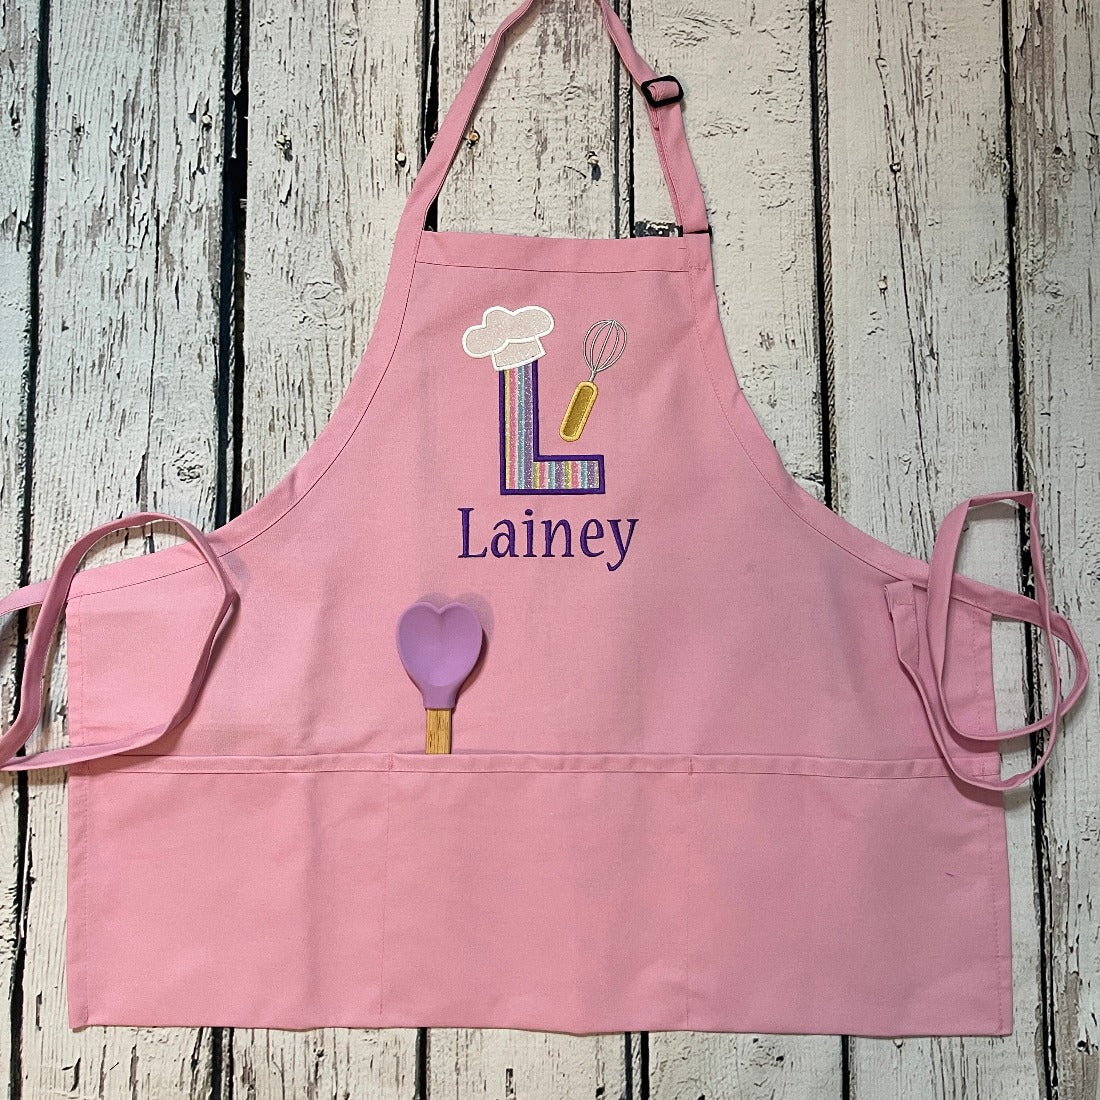 Adult or teen personalized embroidered apron with glitter fabric large initial and name